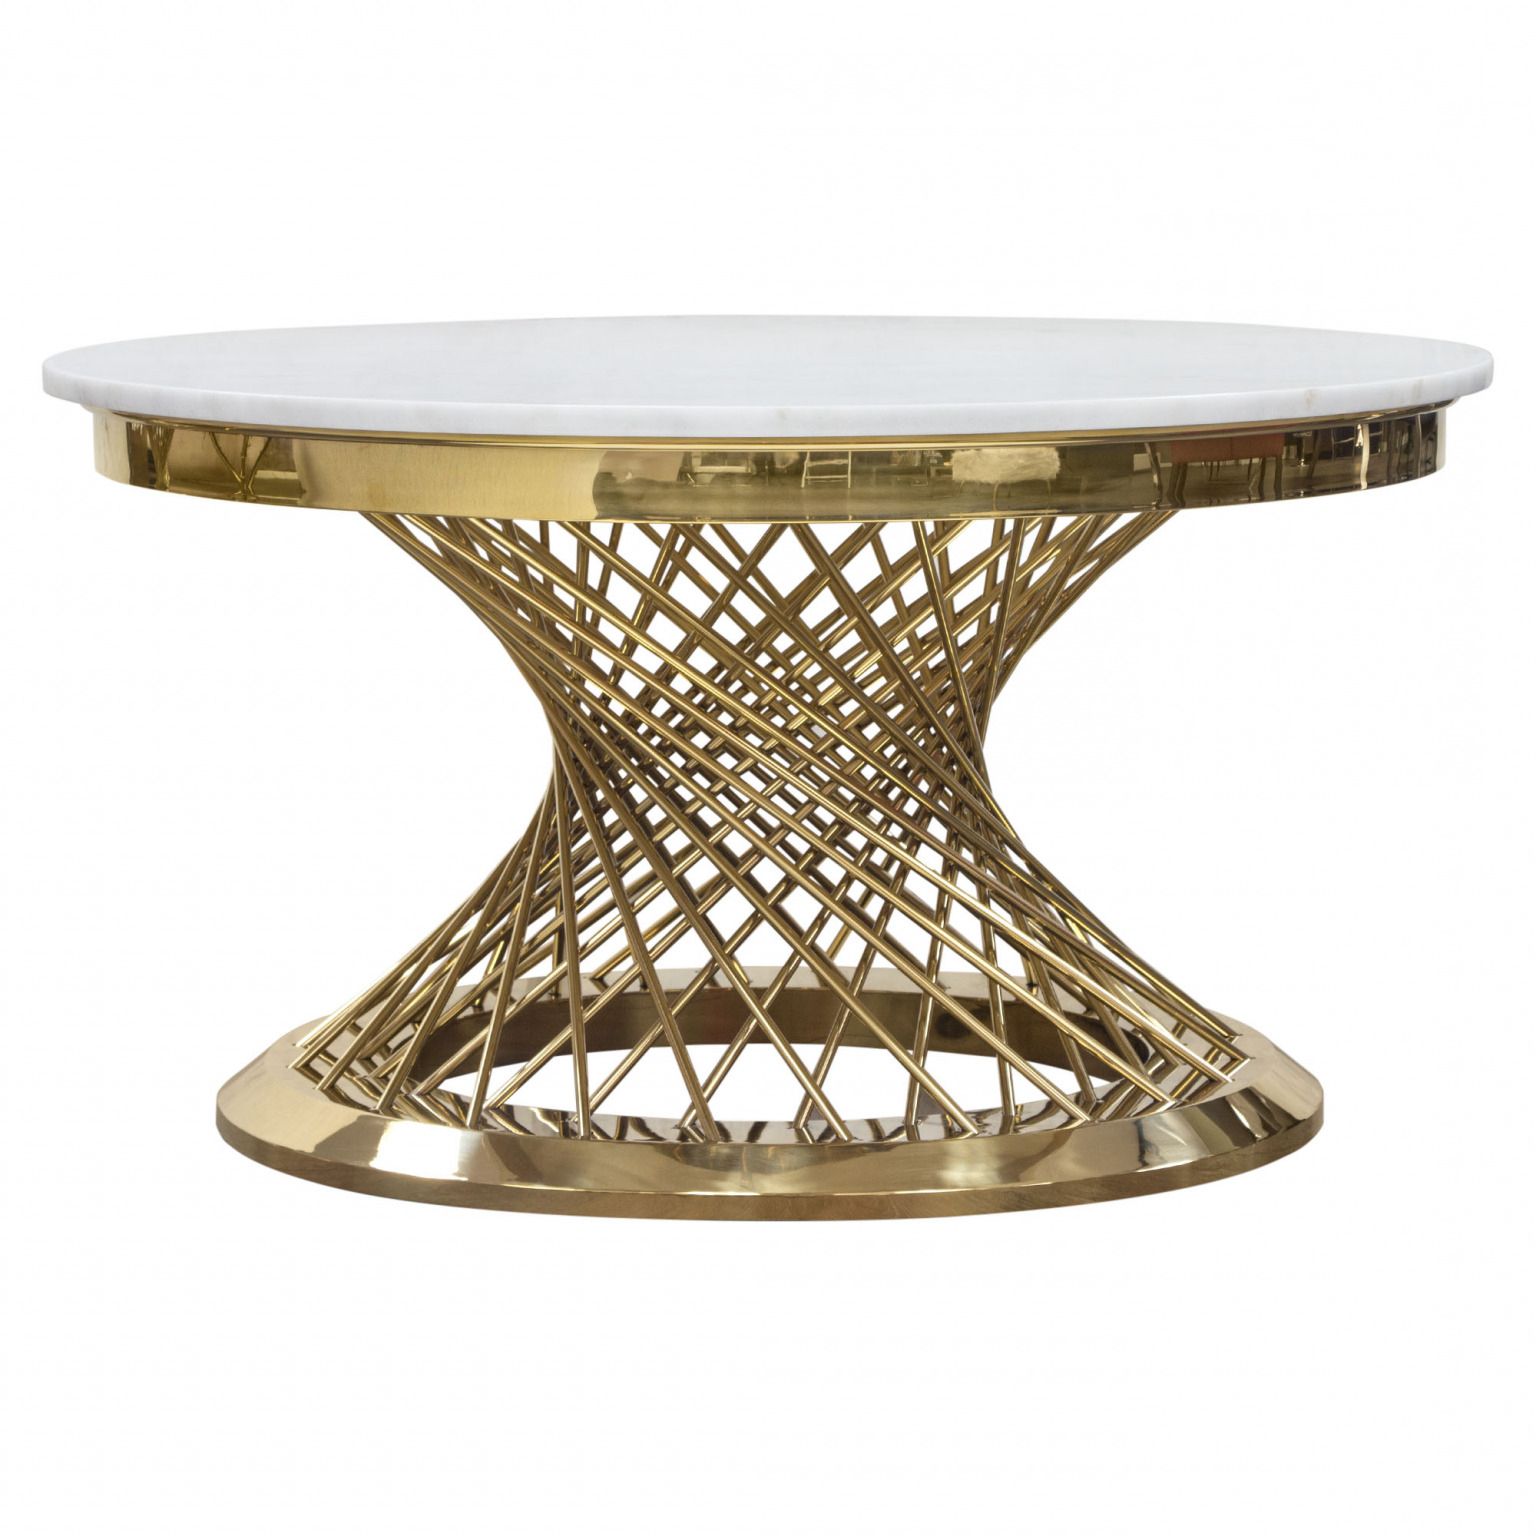 Well Liked Solstice 35" Round Cocktail Table With Genuine Marble Top In Polished Chrome Round Cocktail Tables (View 4 of 20)